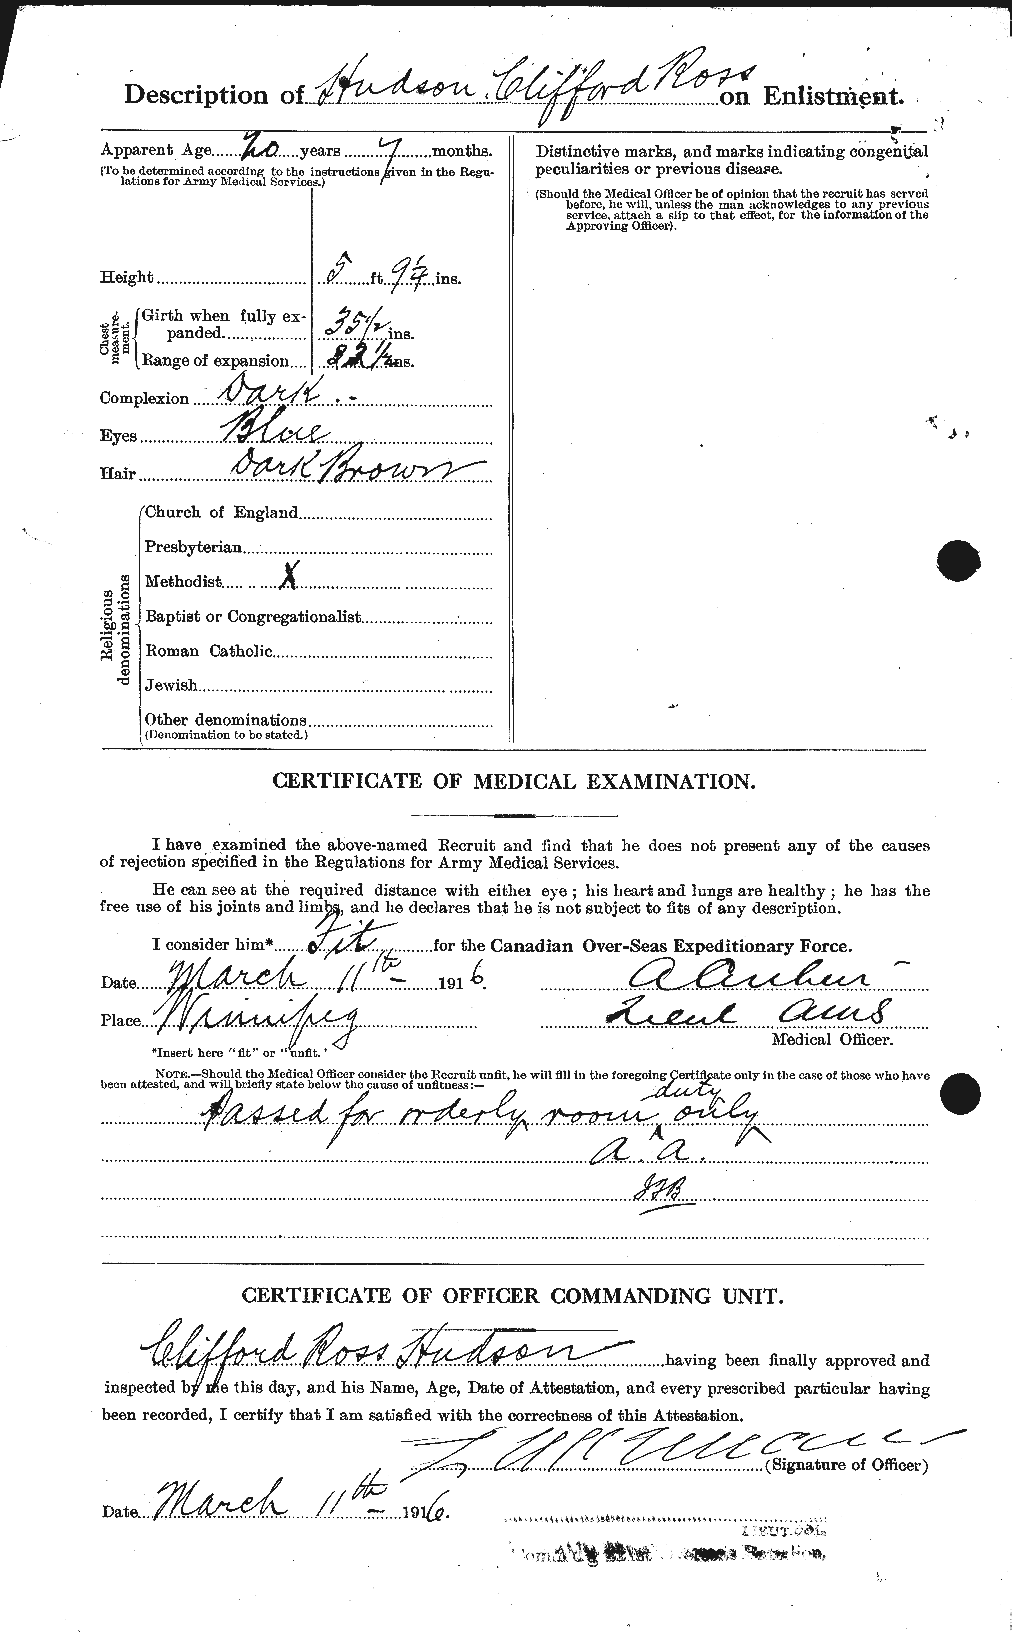 Personnel Records of the First World War - CEF 398882b